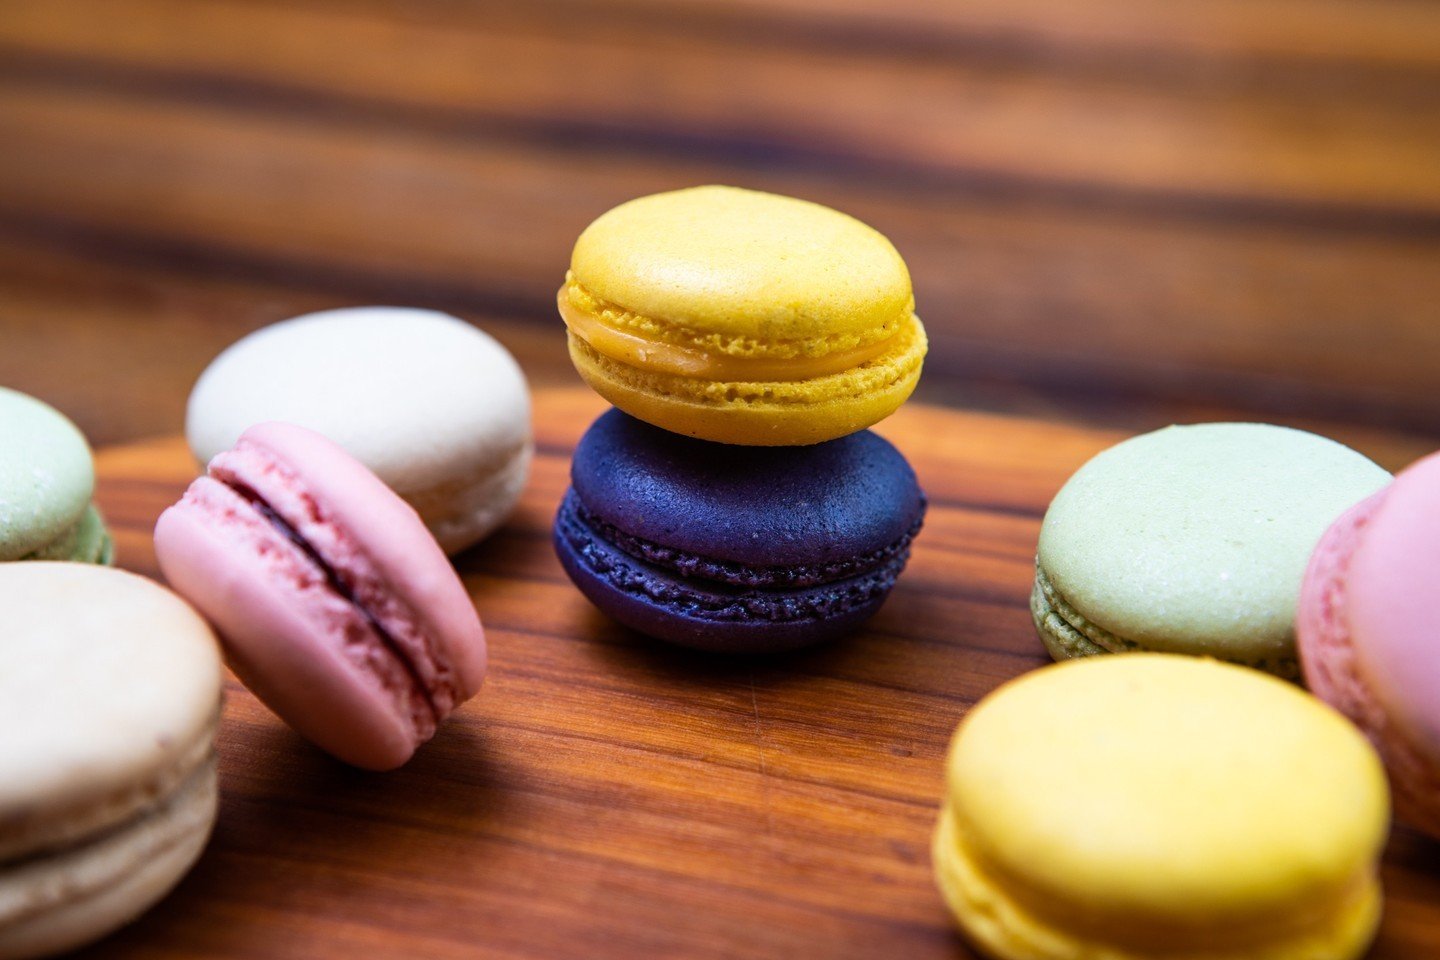 Delicious macarons to go with your delicious @vittoria_coffee ☕️⁠
⁠
#kingstreetcafe #bowenhillscafe #brisbaneeats #brisbanecafe #queensland #FrenchCake #PatisseriePerfection #SweetDelights #DessertGoals #TasteOfFrance #frenchpastry⁠